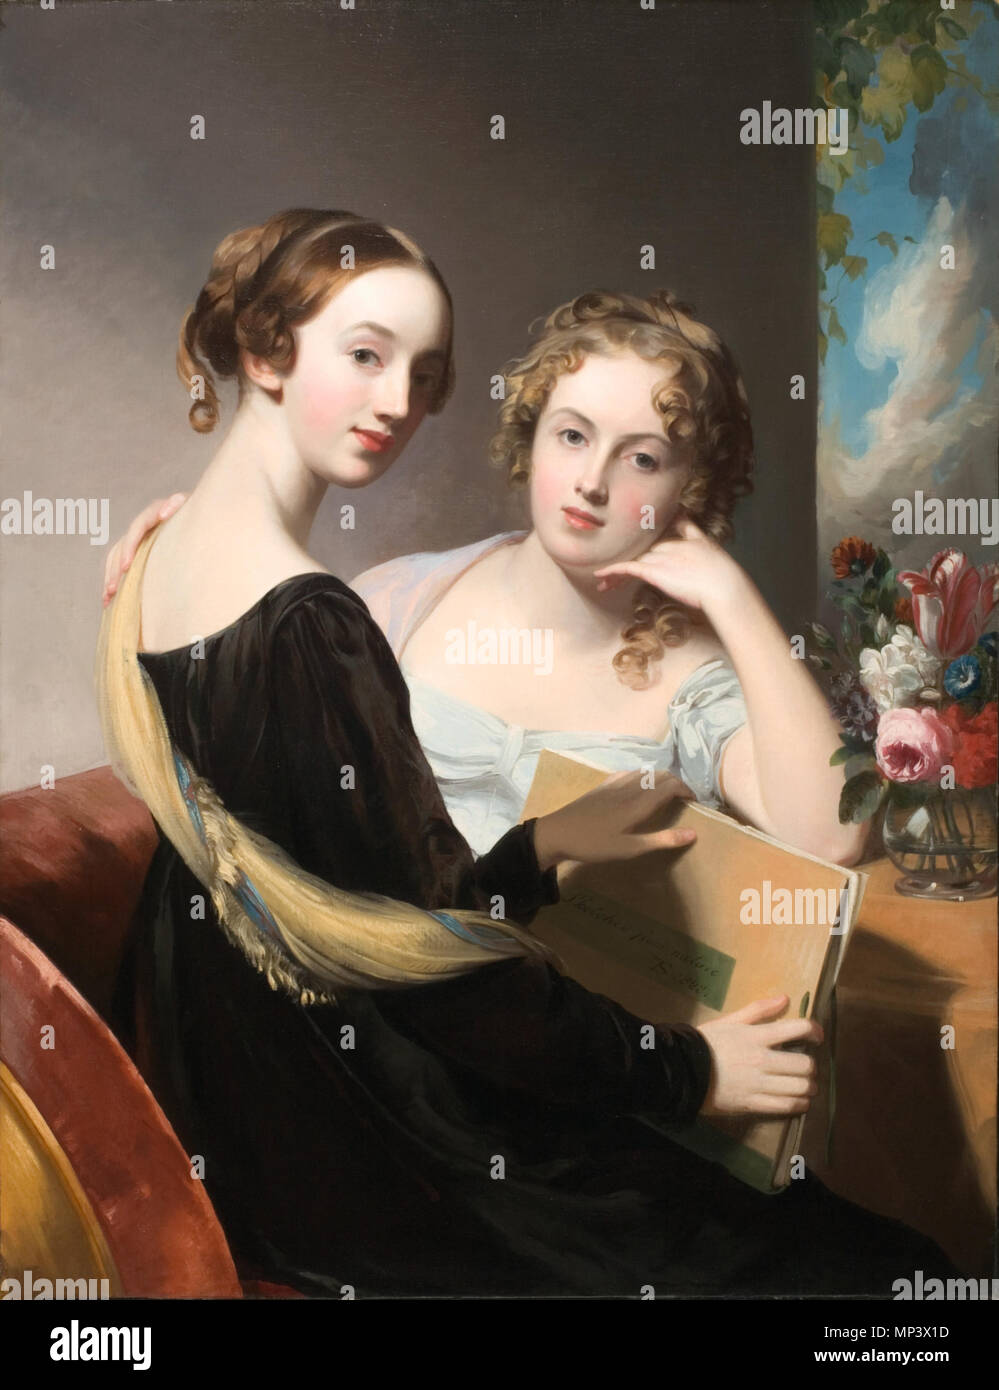 Photographer: S.Oliver Editor: T.Olinger Department: Art of the Middle East   Portrait of the Misses Mary and Emily McEuen   1823.   1190 Thomas Sully Portrait of the Misses Mary and Emily McEuen LACMA M2008 222 2 Stock Photo